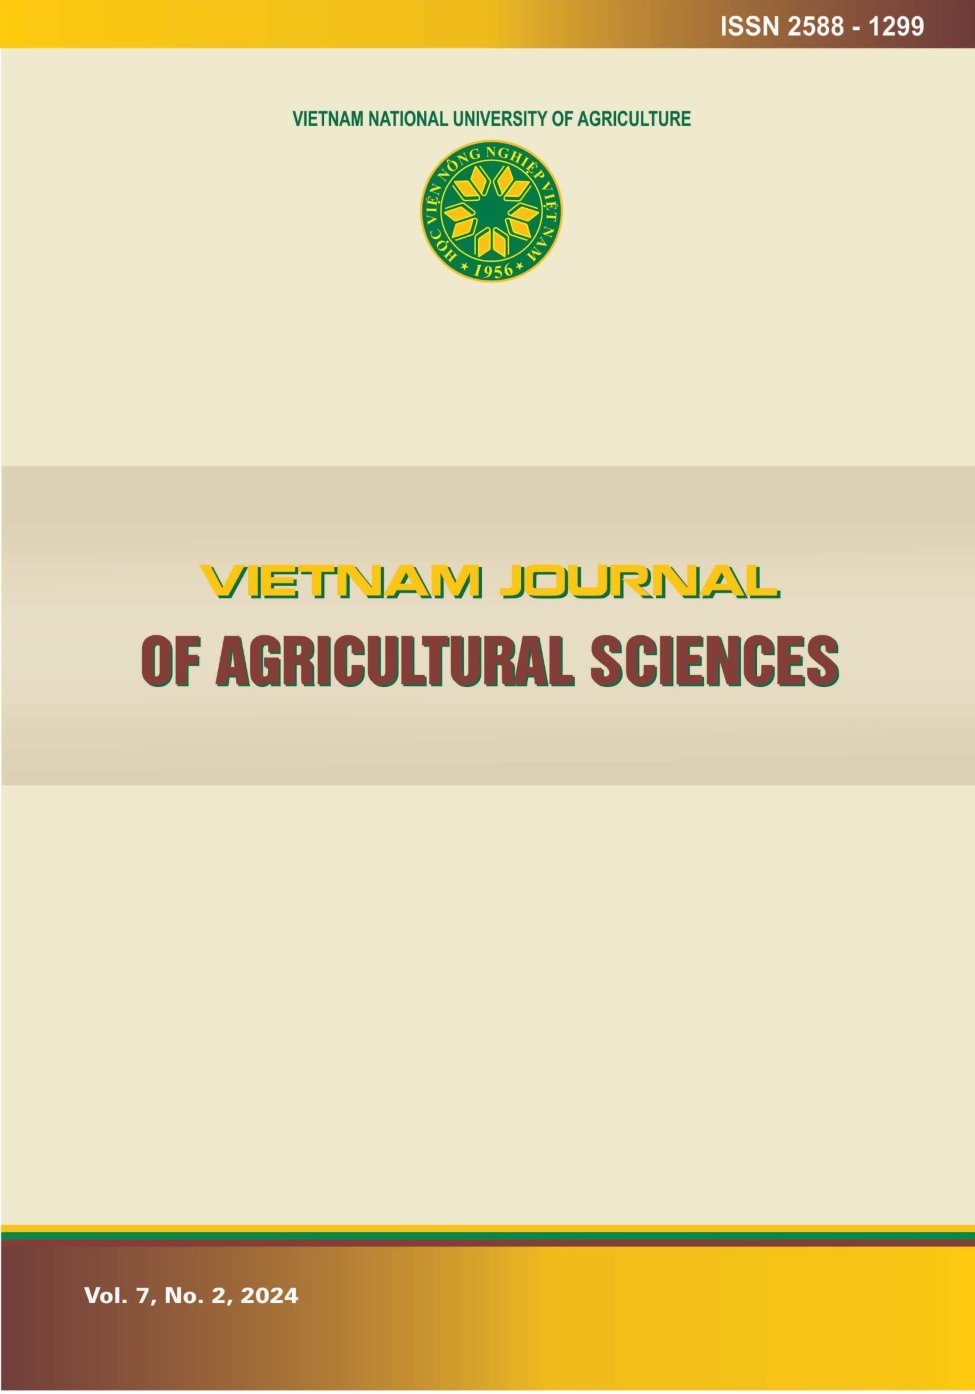 					View Vol. 7 No. 2 (2024): Vietnam Journal of Agricultural Sciences
				